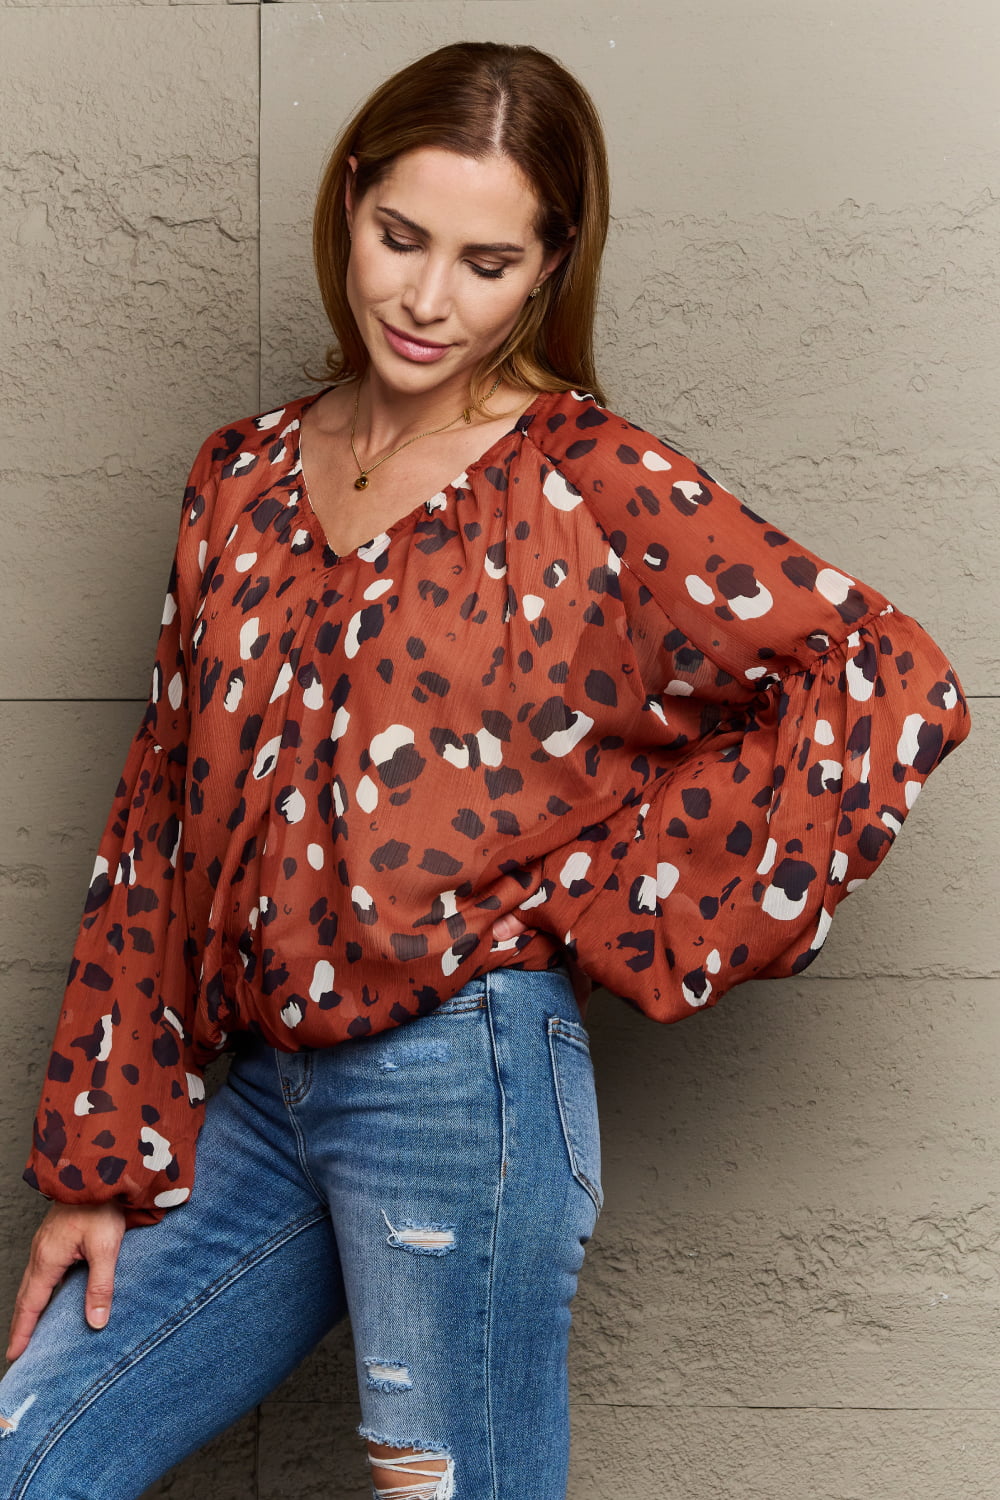 Hailey & Co Come See Me Spotted Printed Chiffon Blouse - Lola Cerina Boutique